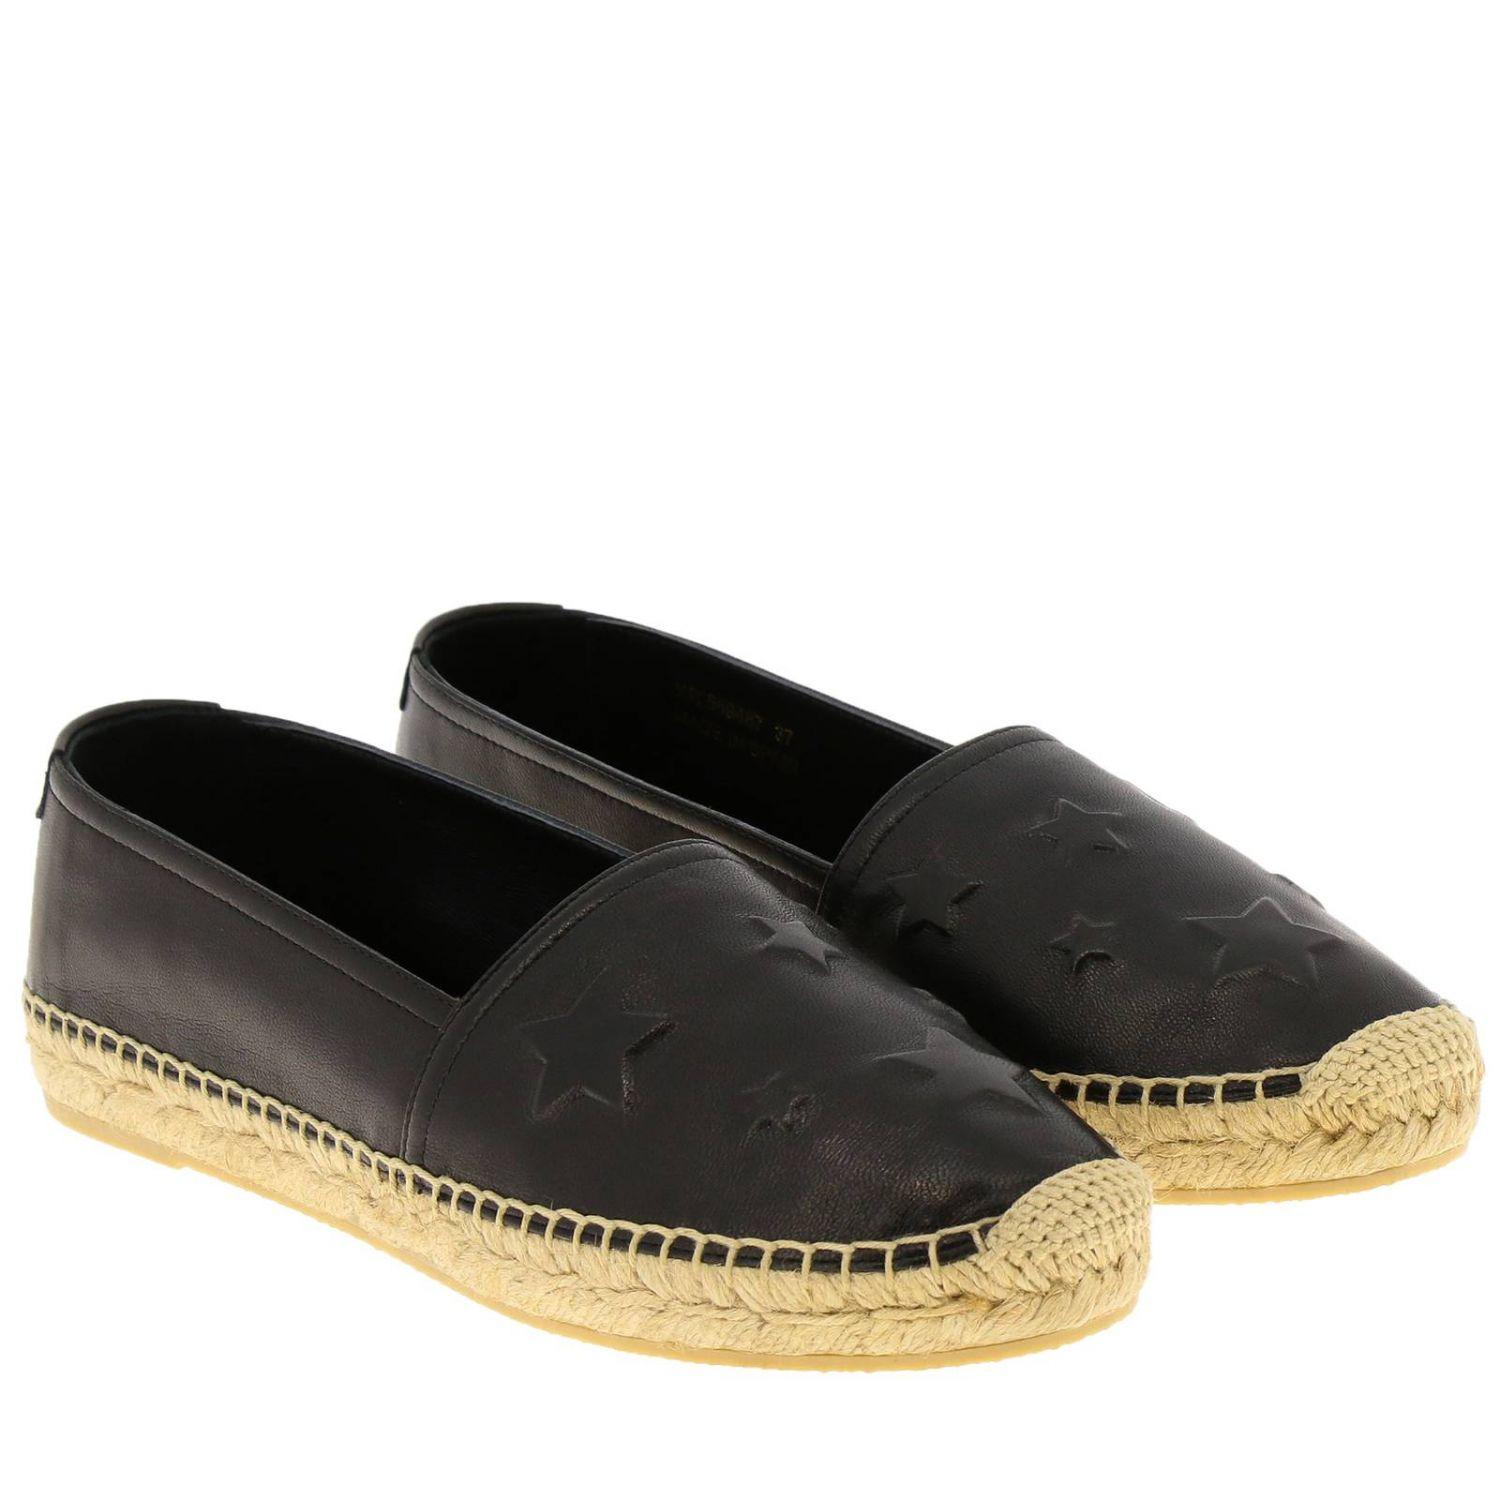 Saint Laurent Star Embossed Black Leather Espadrille

These Saint Laurent black leather espadrilles feature an almond toe, braided raffia rubber sole, and a slip-on style. Brand new. Made in Spain.

Size: 40